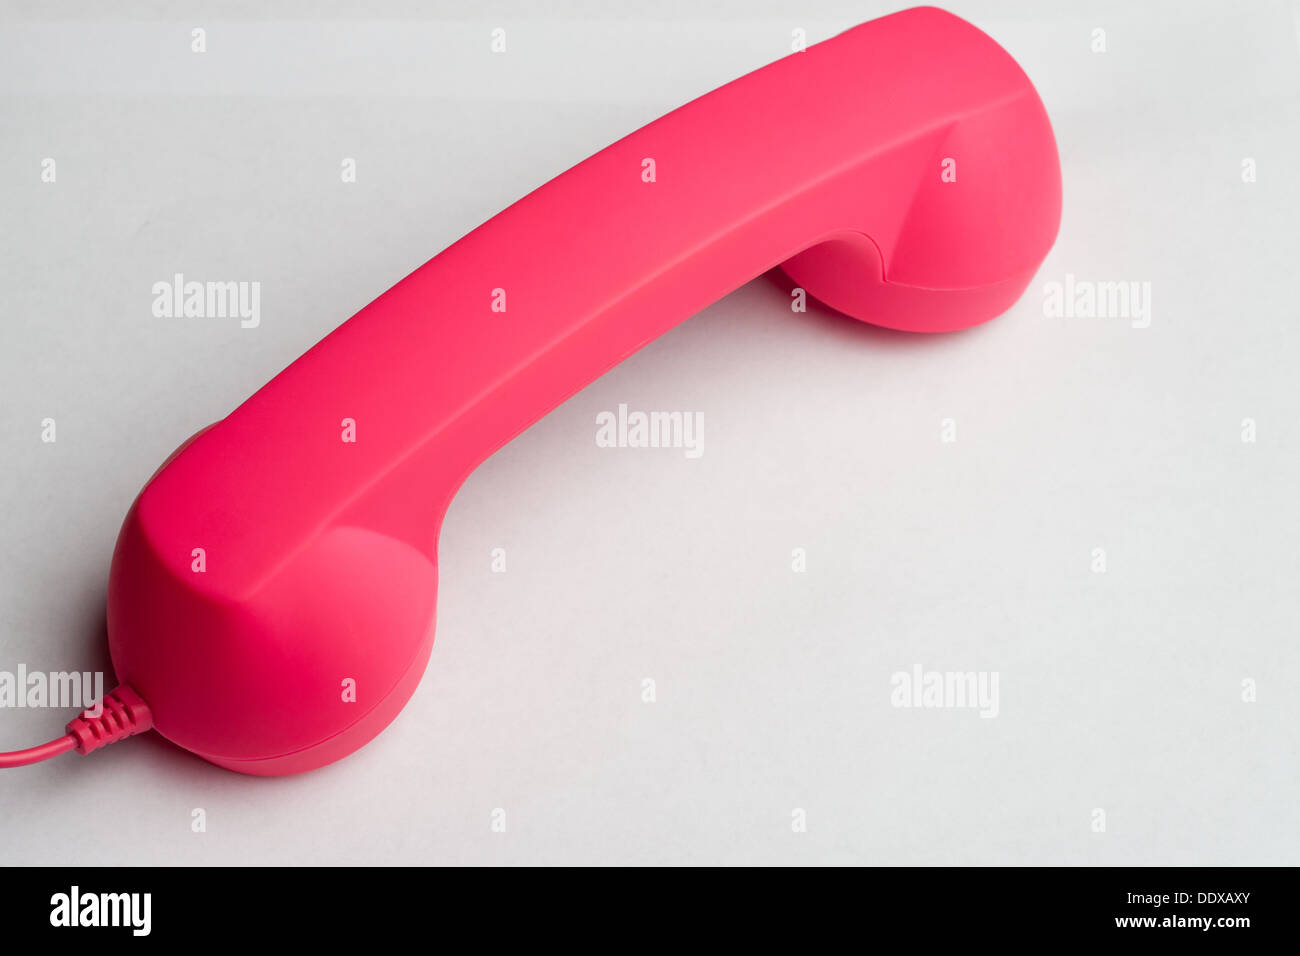 Hot pink phone face down on white surface Stock Photo